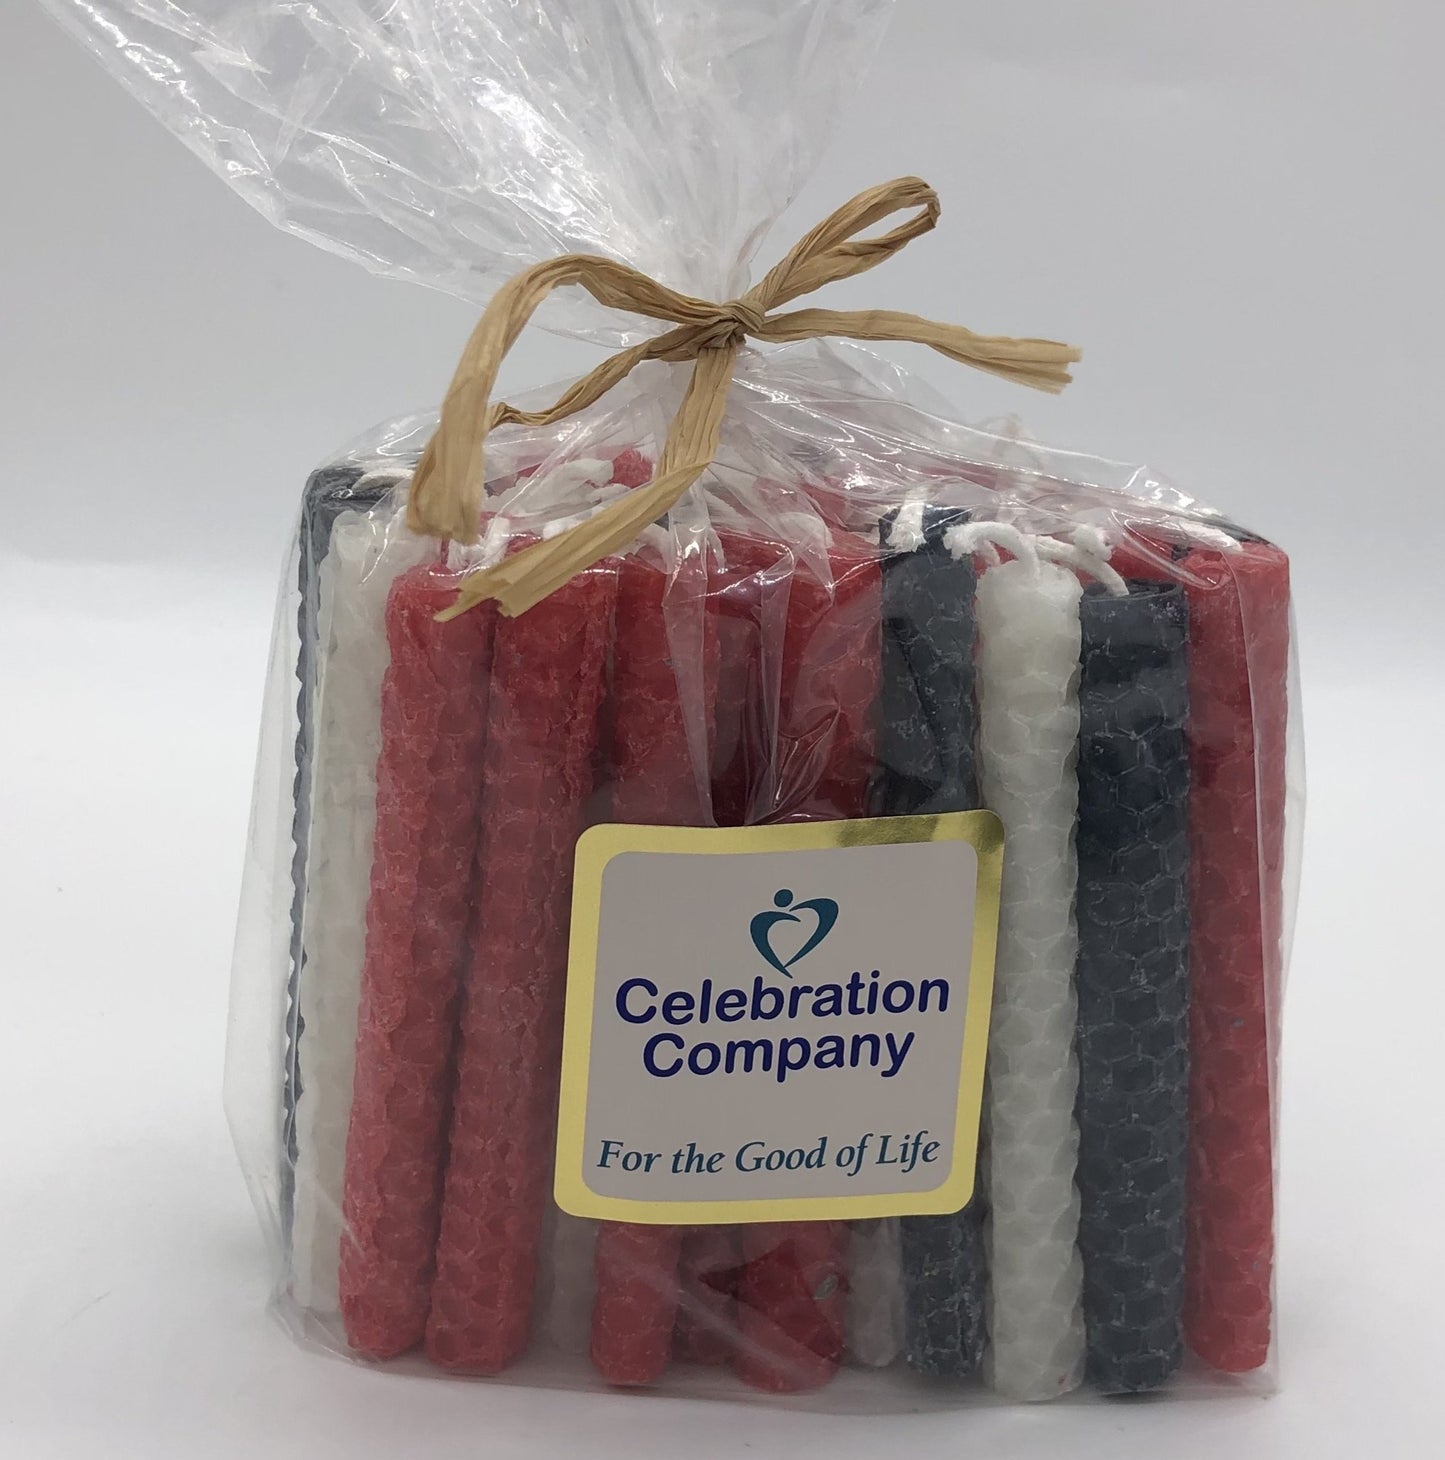 Package of 44 Chanukah candles in navy blue, red and white.  The package is tied with raffia on top and has a white logo sticker on the front.